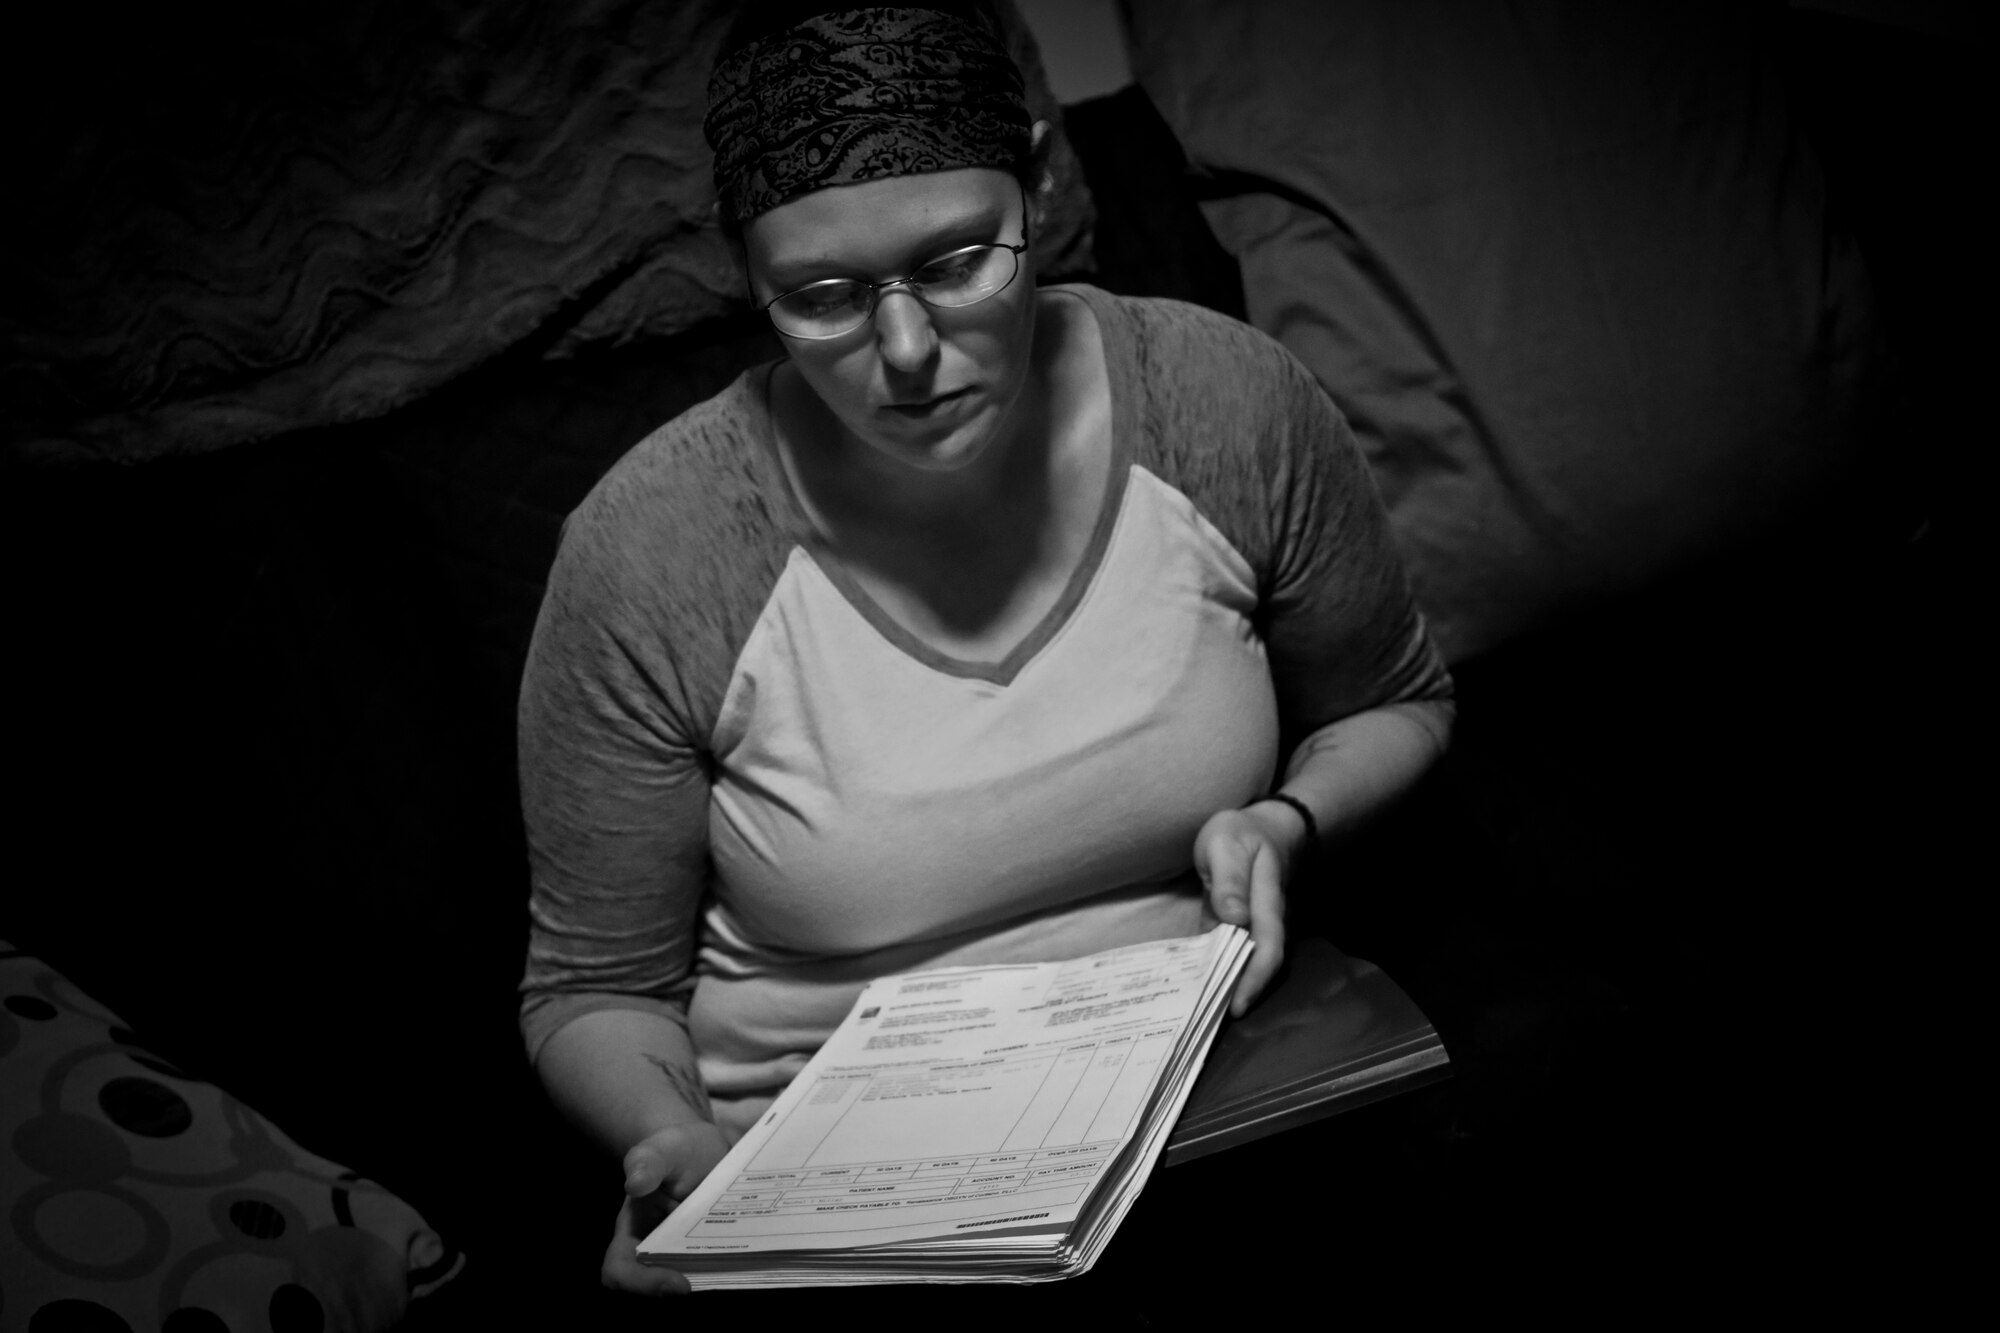 Rachel Miller, 30, looks at a stack of unpaid medical bills, July 19, 2016. Miller and her boyfriend Matt Nichol are both on disability, and live in a small one bedroom apartment in Cortland, N.Y. Nearly one in three residents of Cortland are at or below the poverty line. Miller and Nichol attended the Healthy Cortland Innovative Readiness Training event aimed at Cortland residents, which included military service members providing no cost medical, dental, optometry, and veterinary care. (U.S. Air National Guard photo by Tech. Sgt. Matt Hecht/Released)